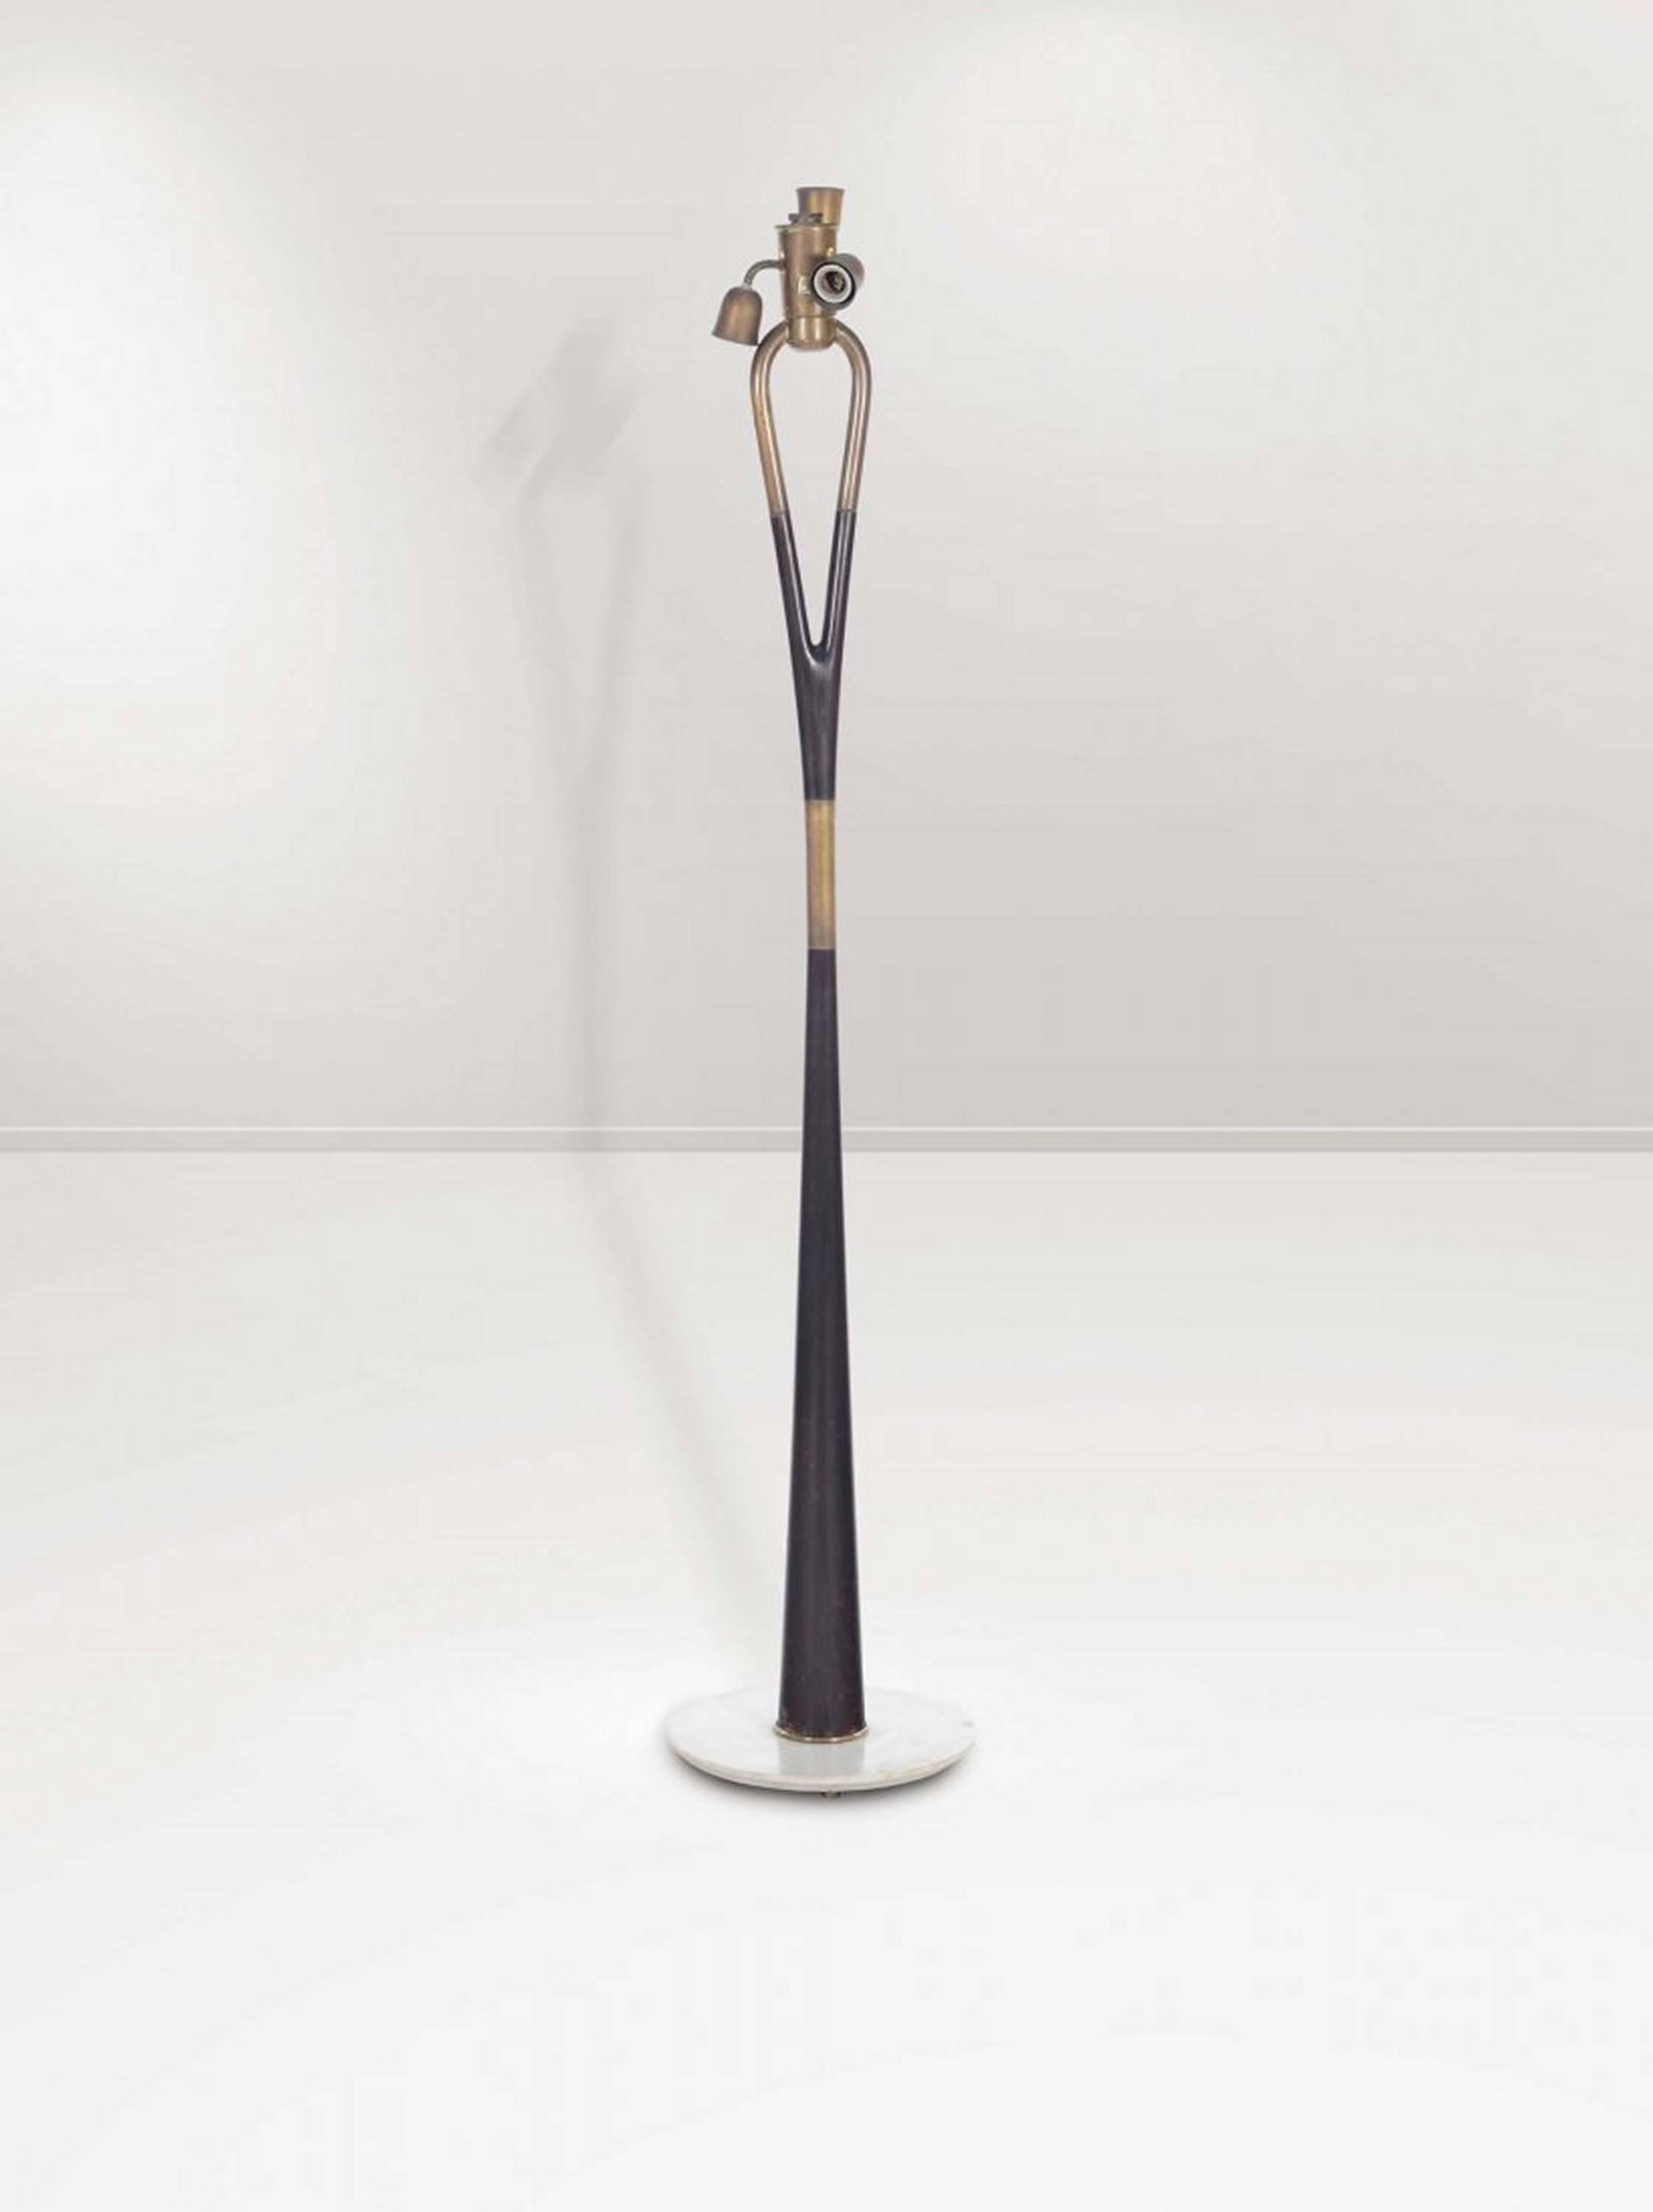 Elegant floor lamp with bespoke shade, palisander stem with brass detail and Carrara marble base.